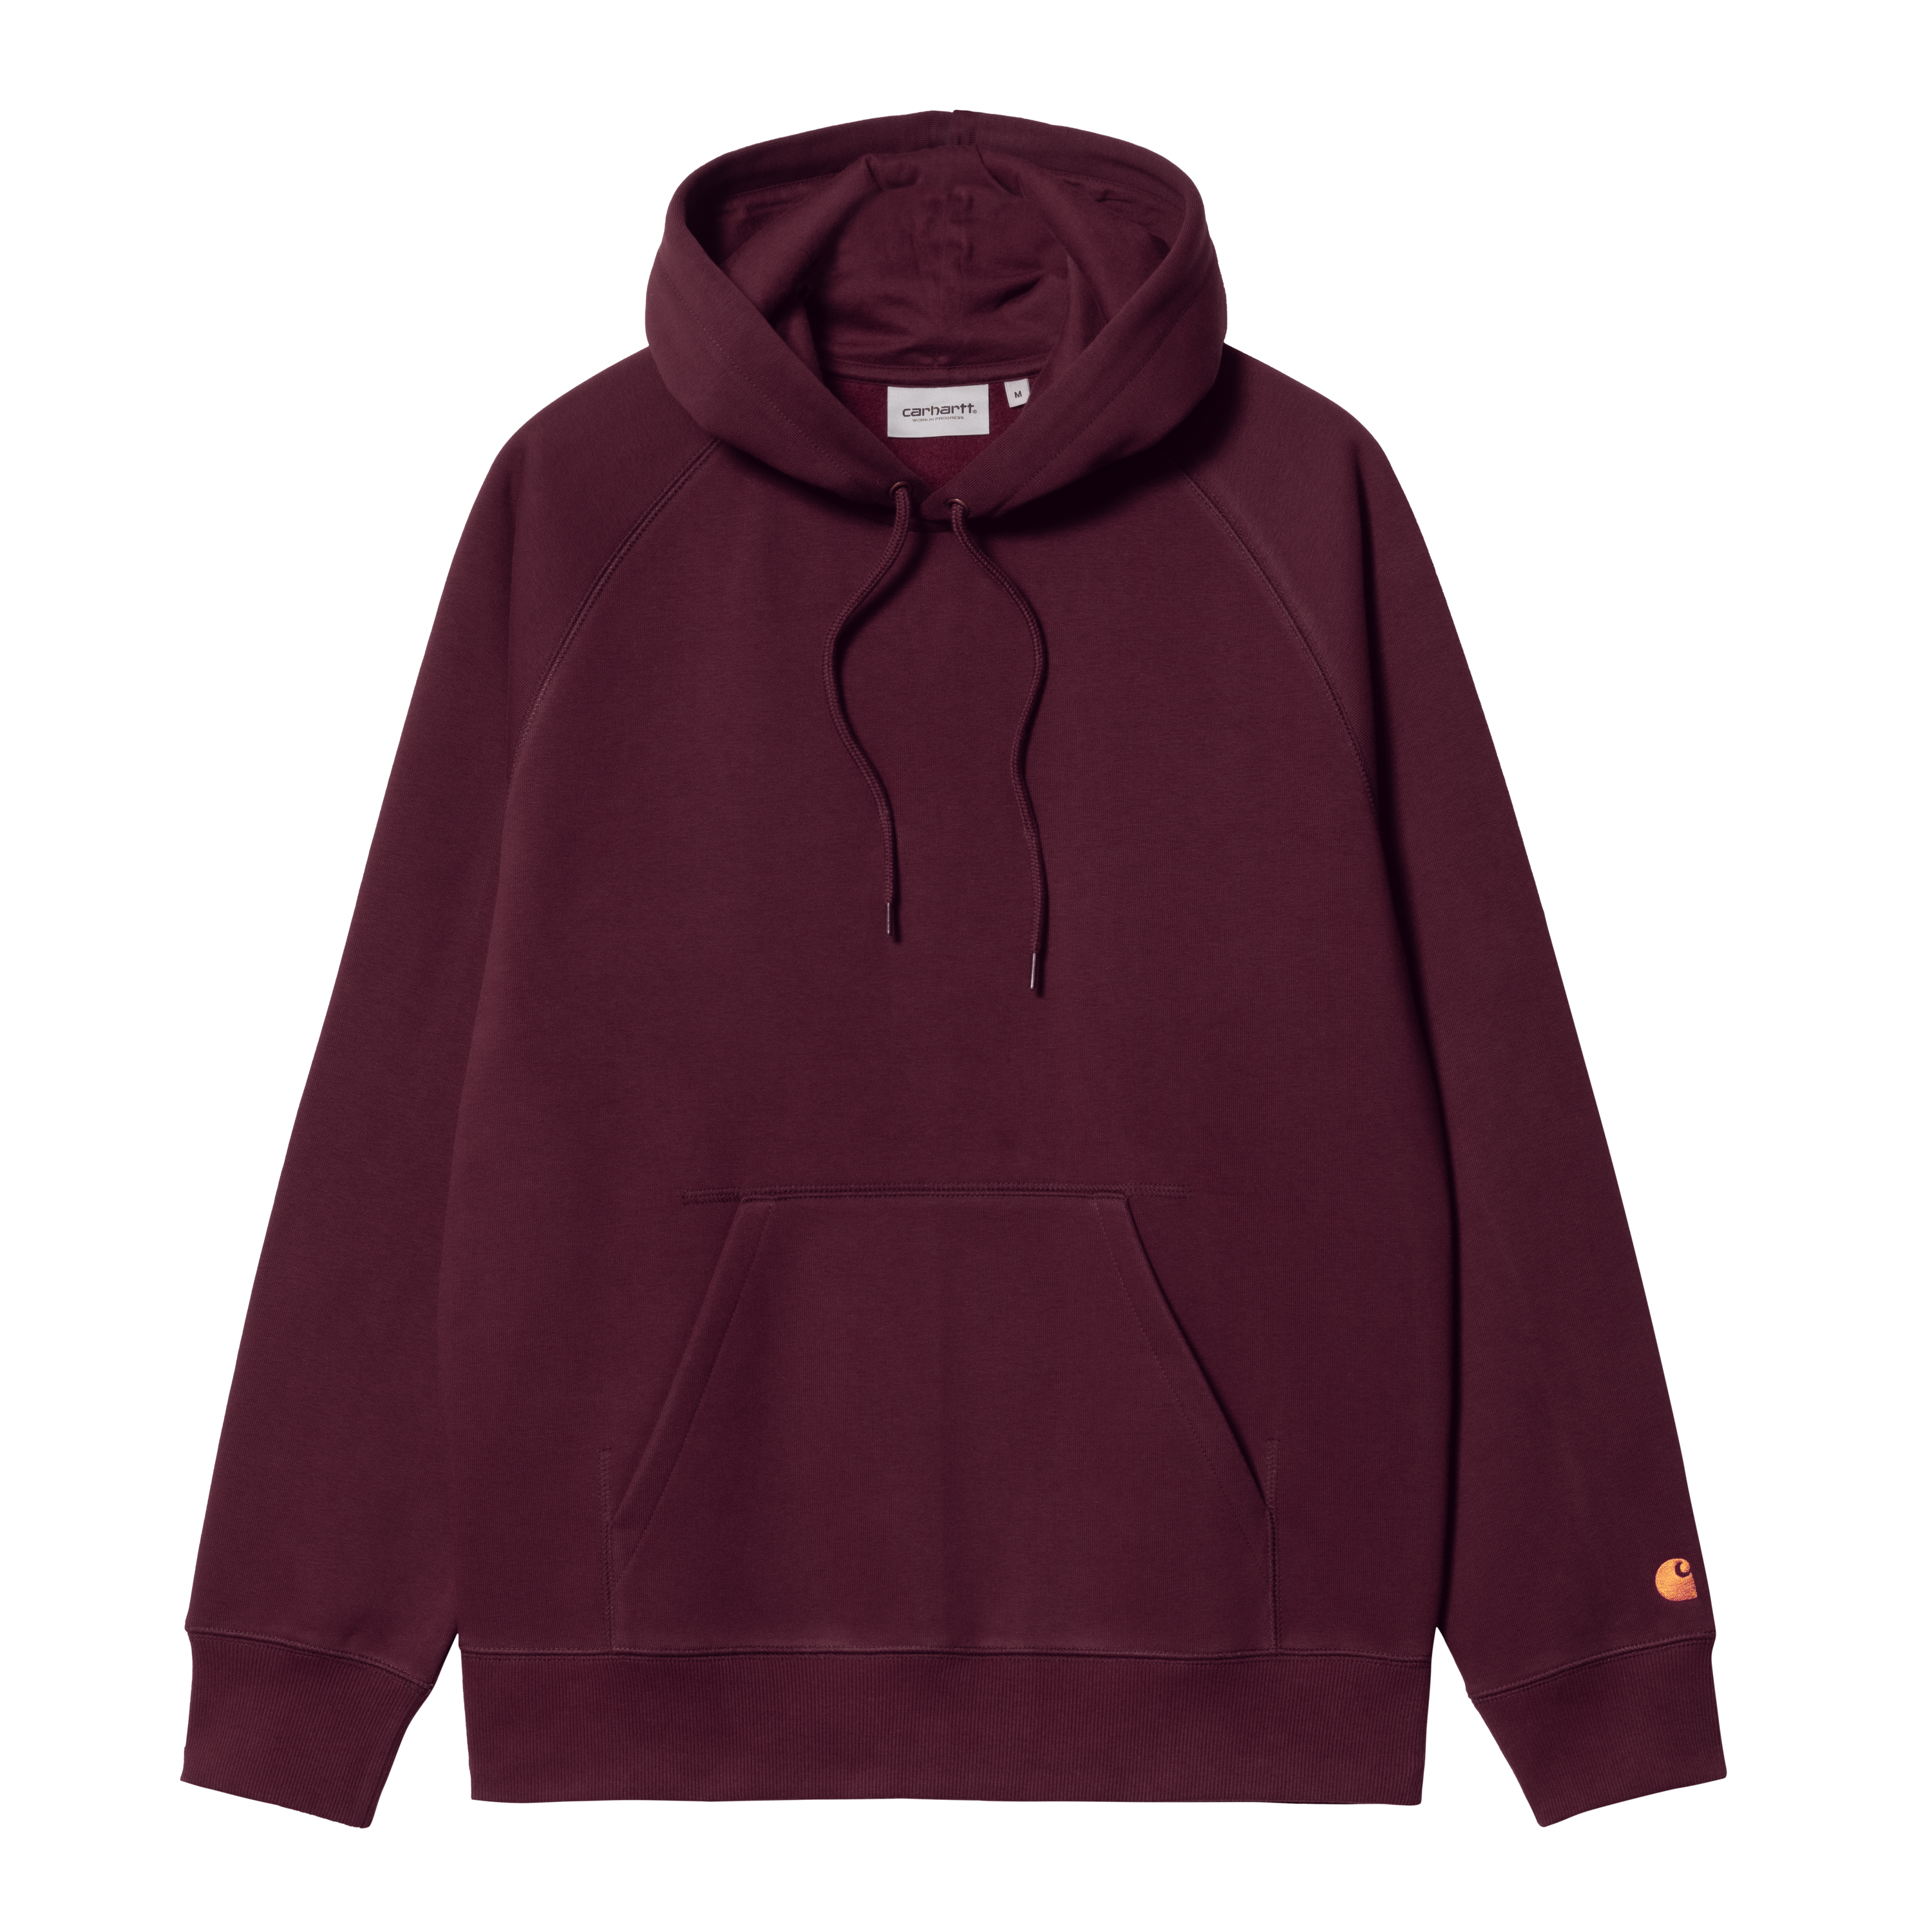 Carhartt WIP - HOODED CHASE SWEAT - Amarone/Gold